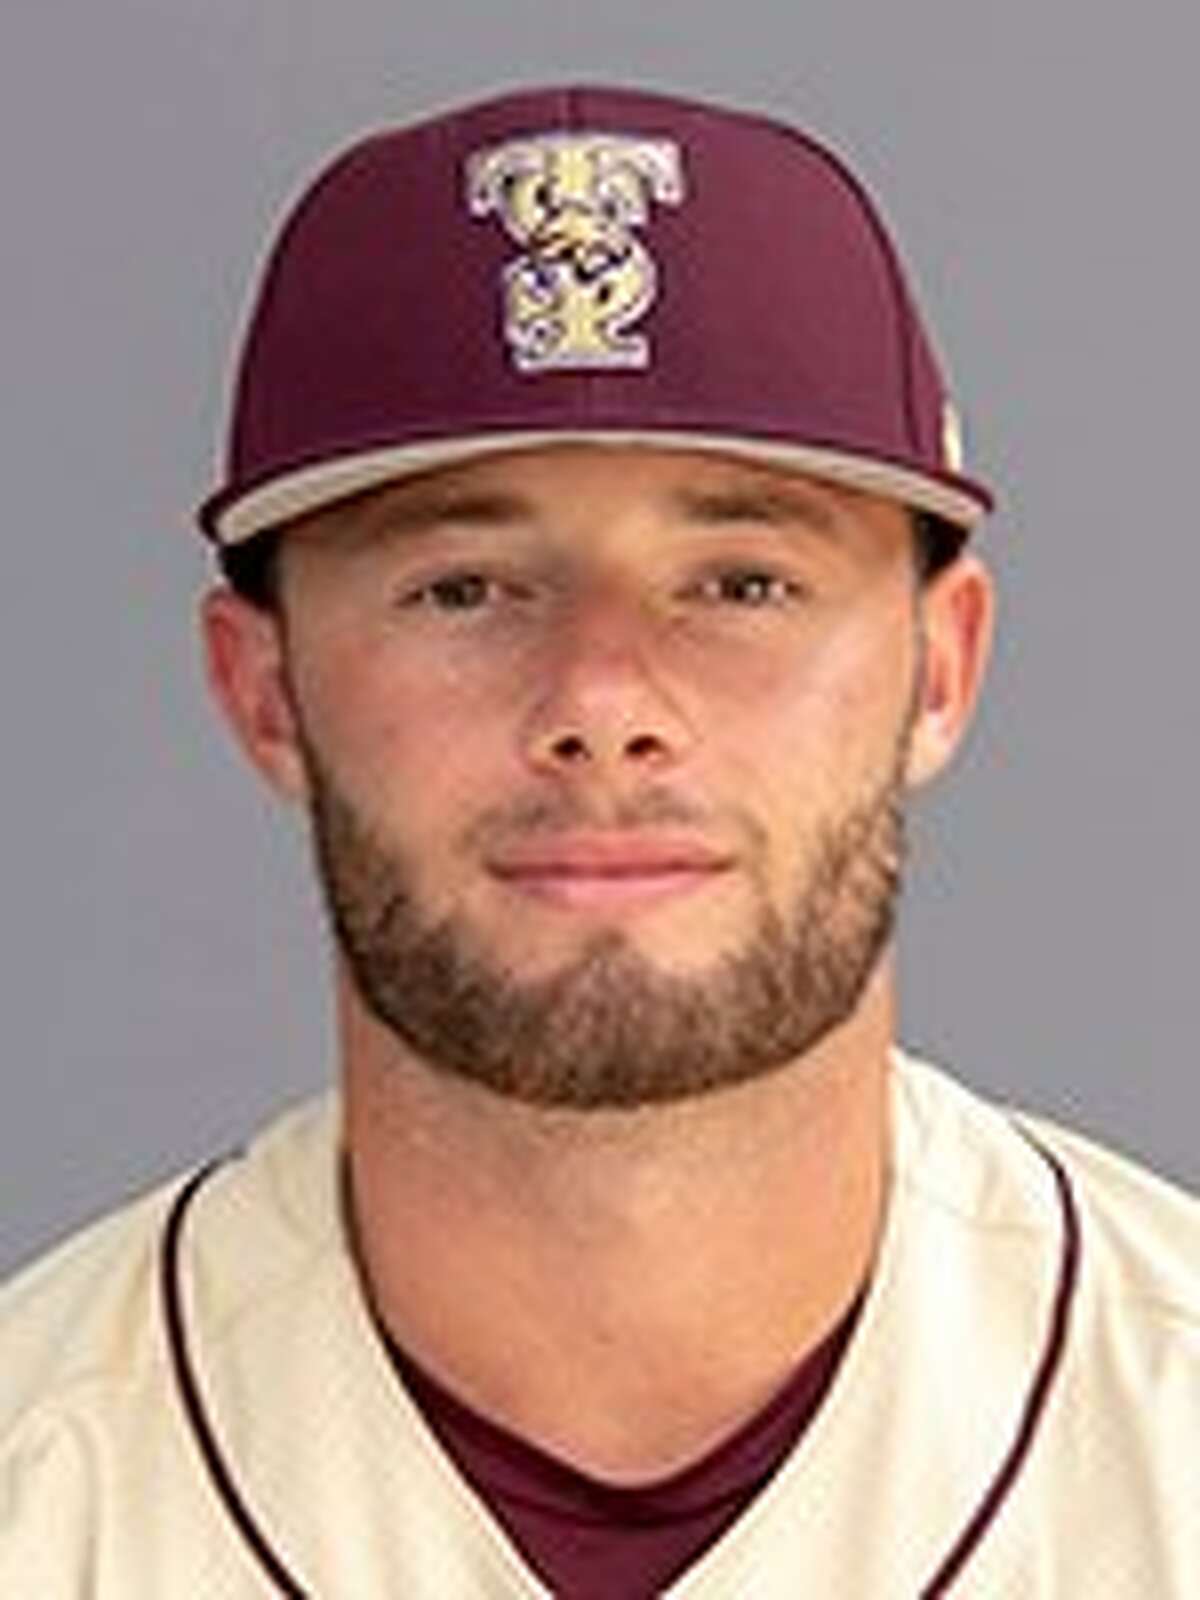 Lee grad and Texas State outfielder John Wuthrich